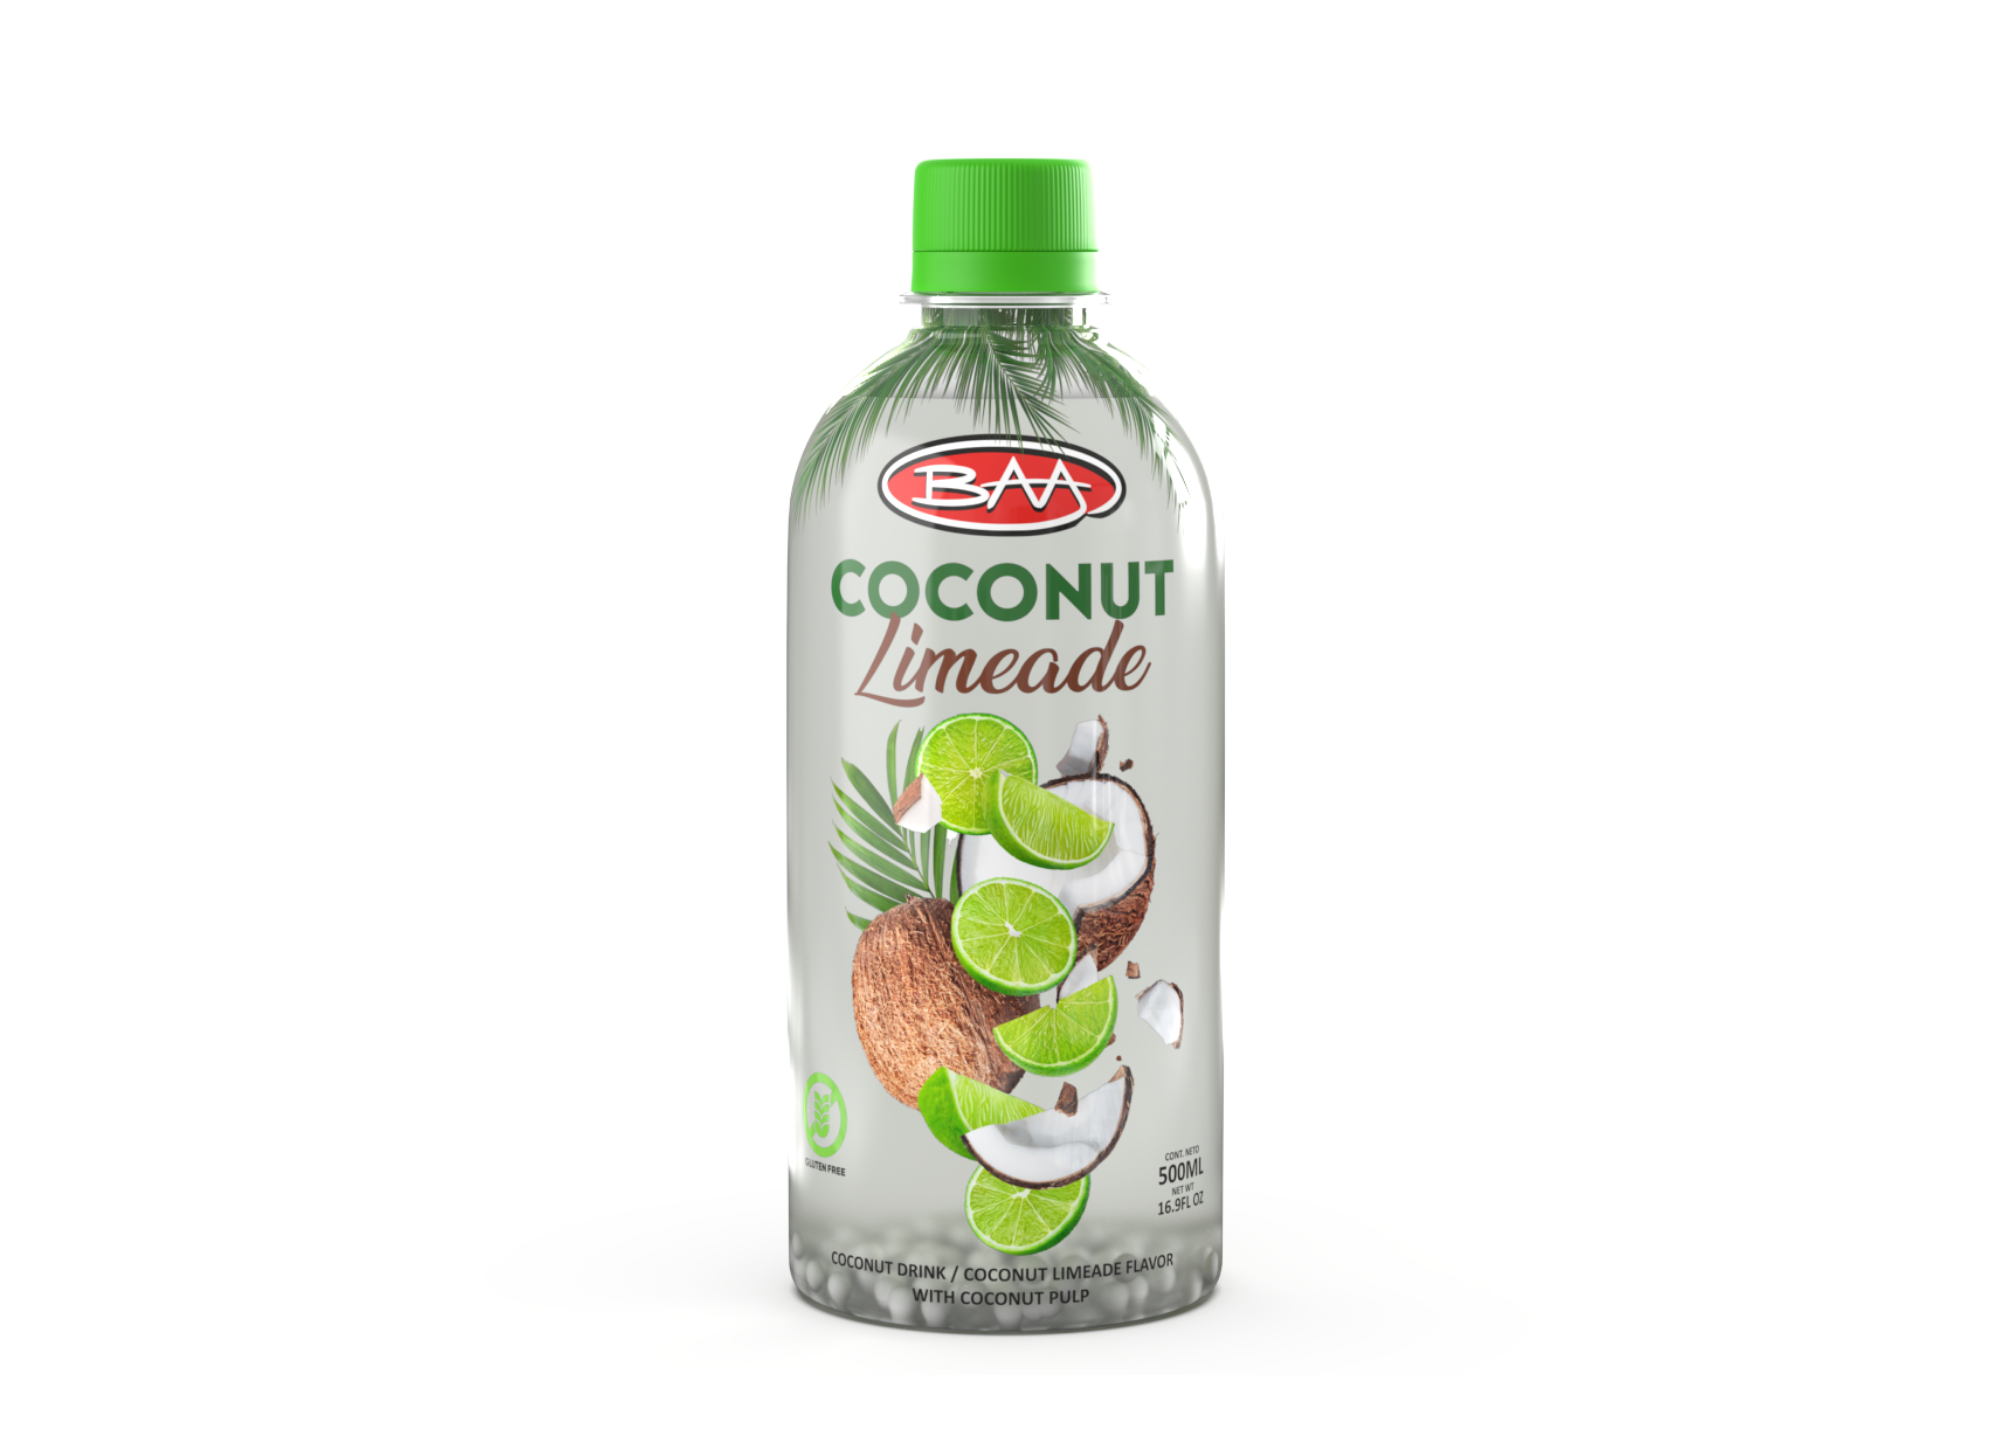 BAA Coconut Limeade Drink with Coconut Boba Pearls, Case of 12, 16oz Bottles, Vegan, Gluten-Free, Only 60 Calories 12 units per case 17.0 fl